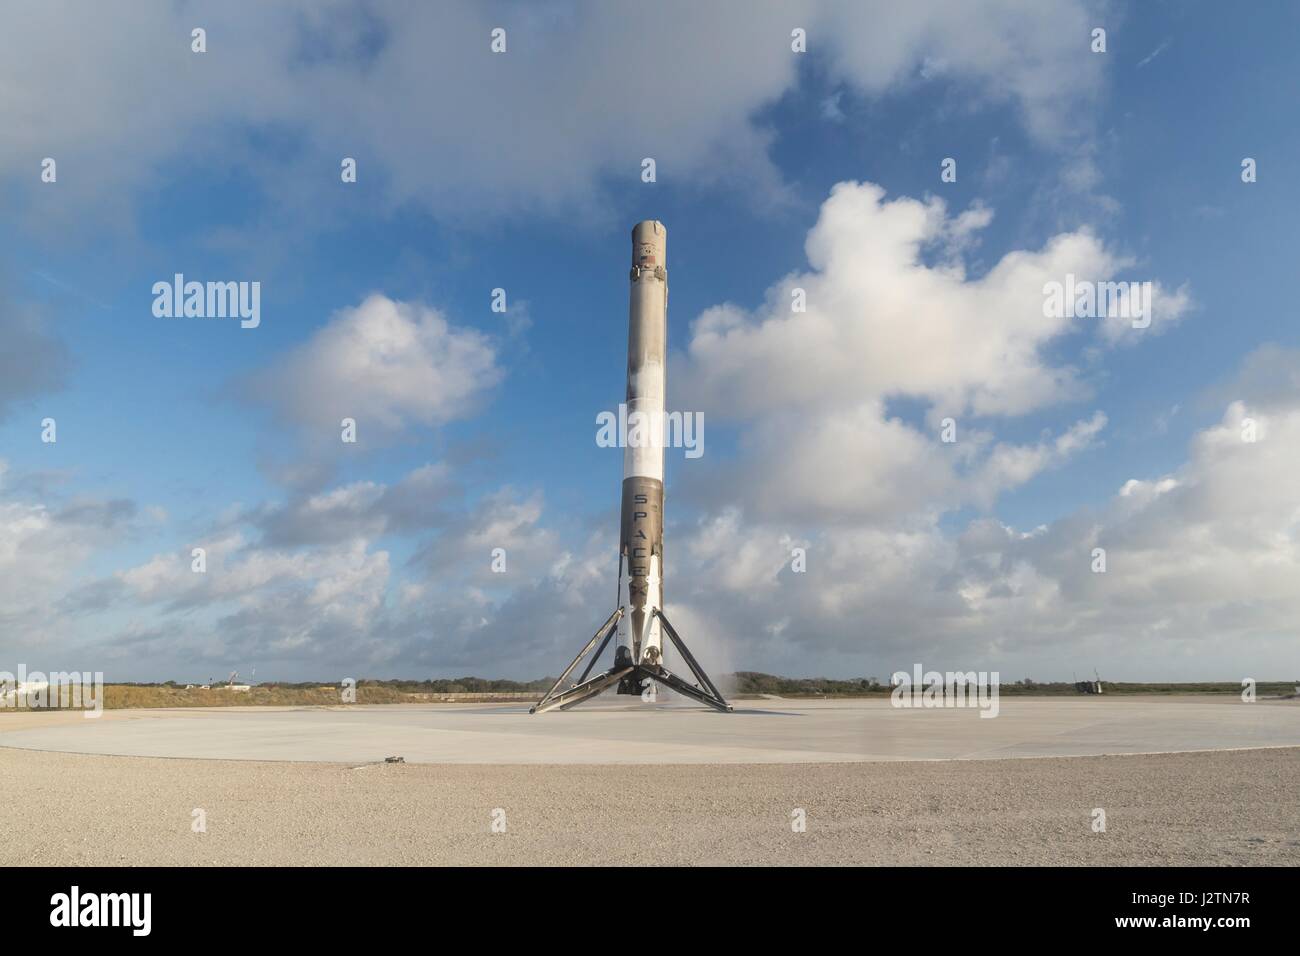 Cape Canaveral, United States Of America. 01st May, 2017. The SpaceX Falcon 9 booster rocket successfully lands back at the Kennedy Space Center after lifting a classified military satellite into orbit May 1, 2017 in Cape Canaveral, Florida. The delayed SpaceX mission was the first for the National Reconnaissance Office carrying a top-secret spy satellite. Credit: Planetpix/Alamy Live News Stock Photo